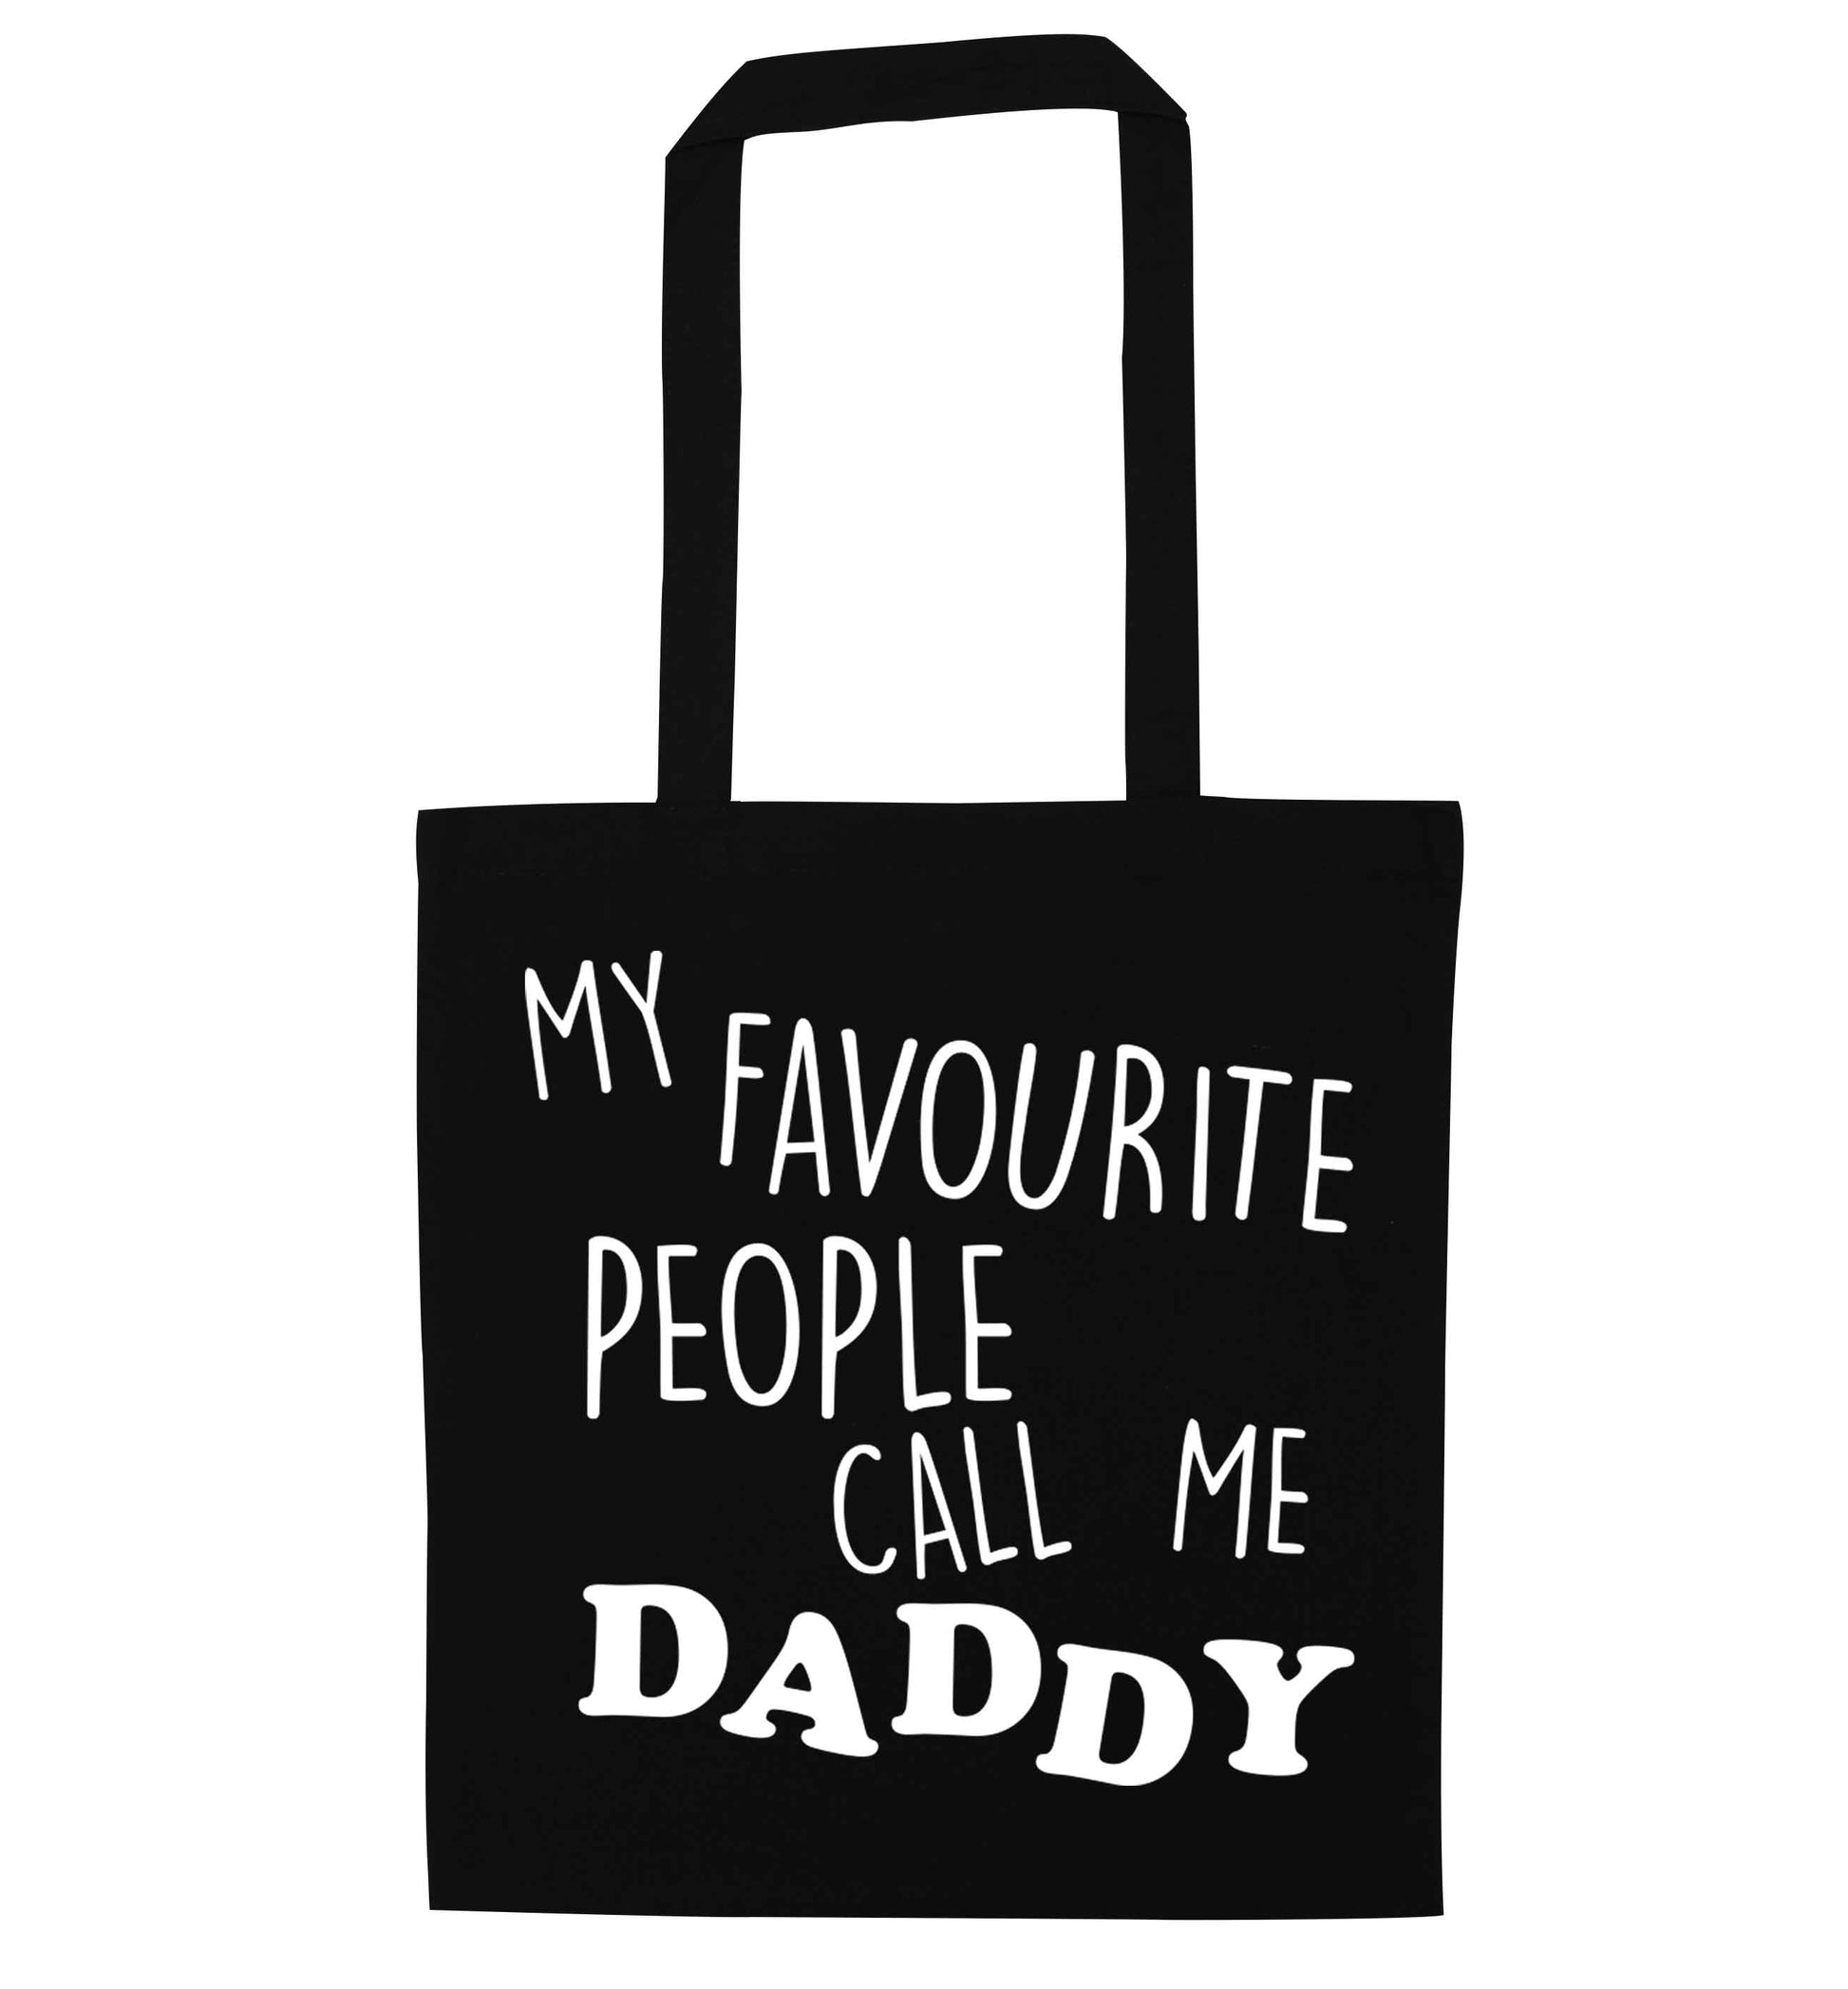 My favourite people call me daddy black tote bag